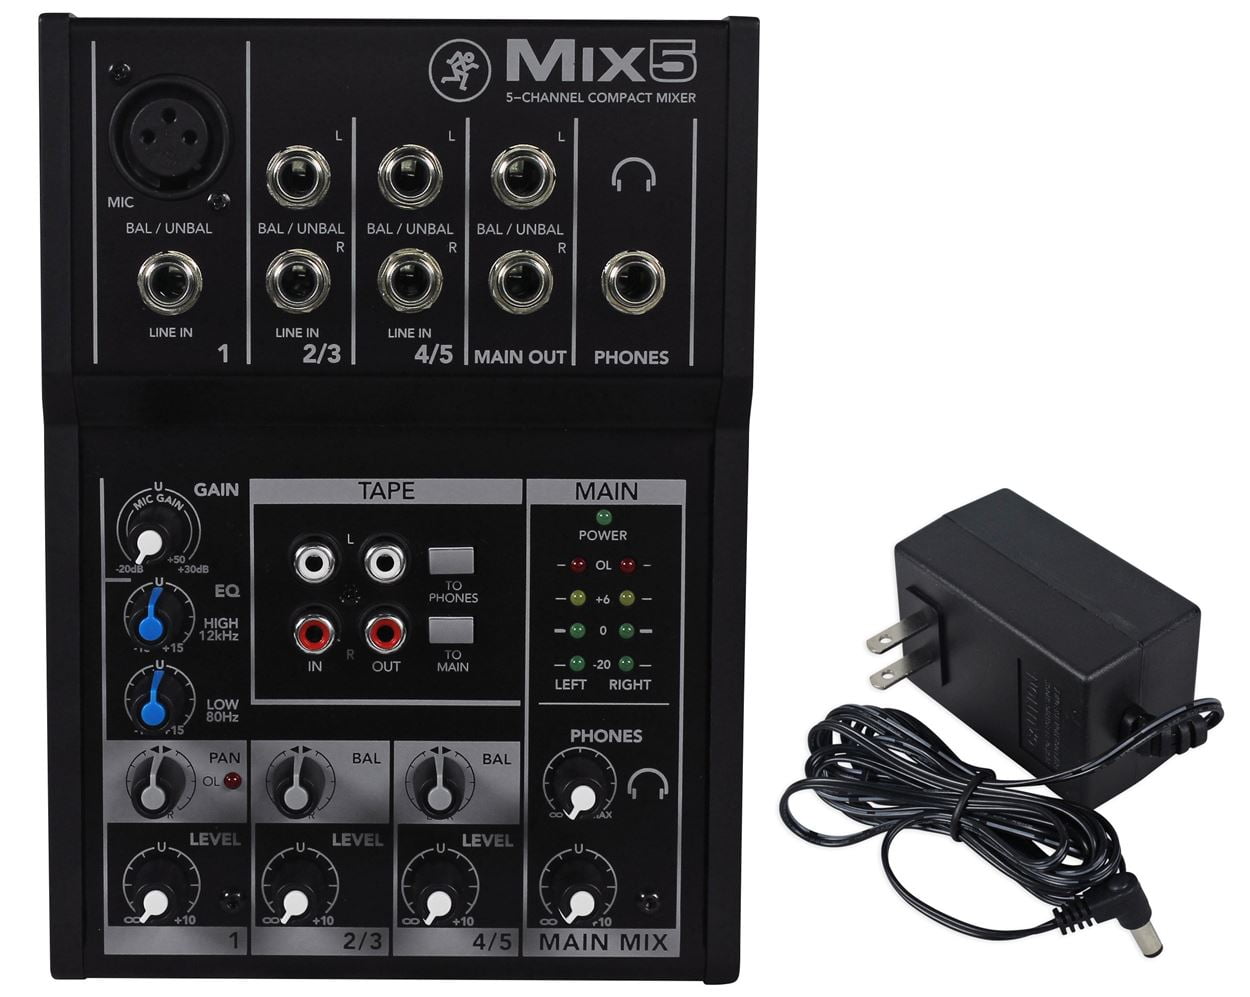 Mackie Mix5 Compact 5 Channel Mixer Backpack Carry Bag